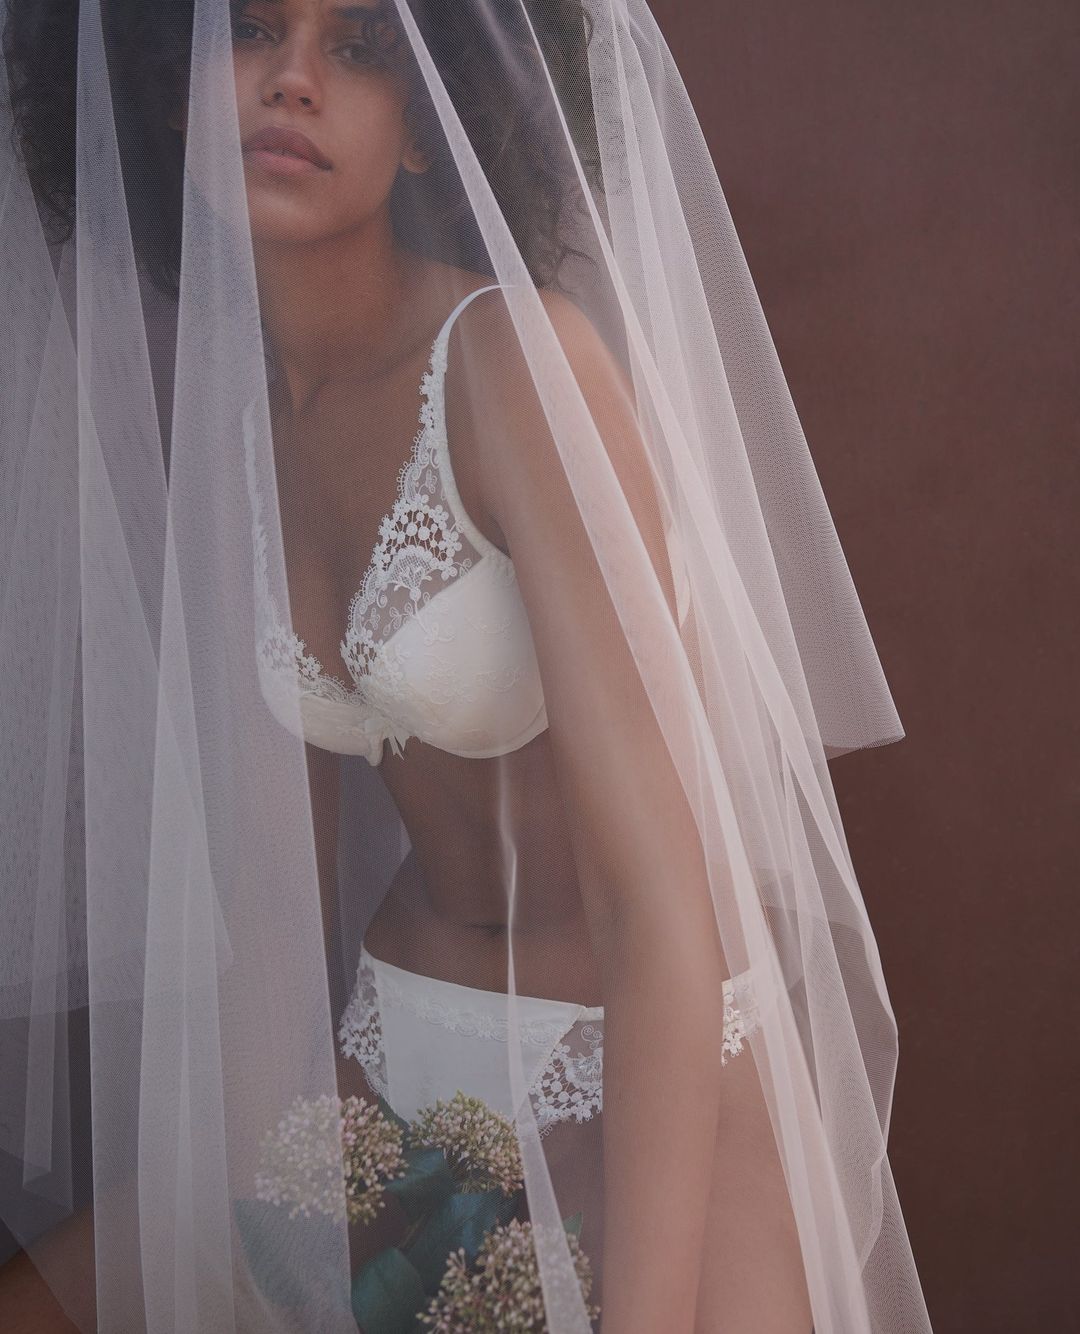 Bridal Lingerie: From Wedding Shapewear to Lingerie Sets